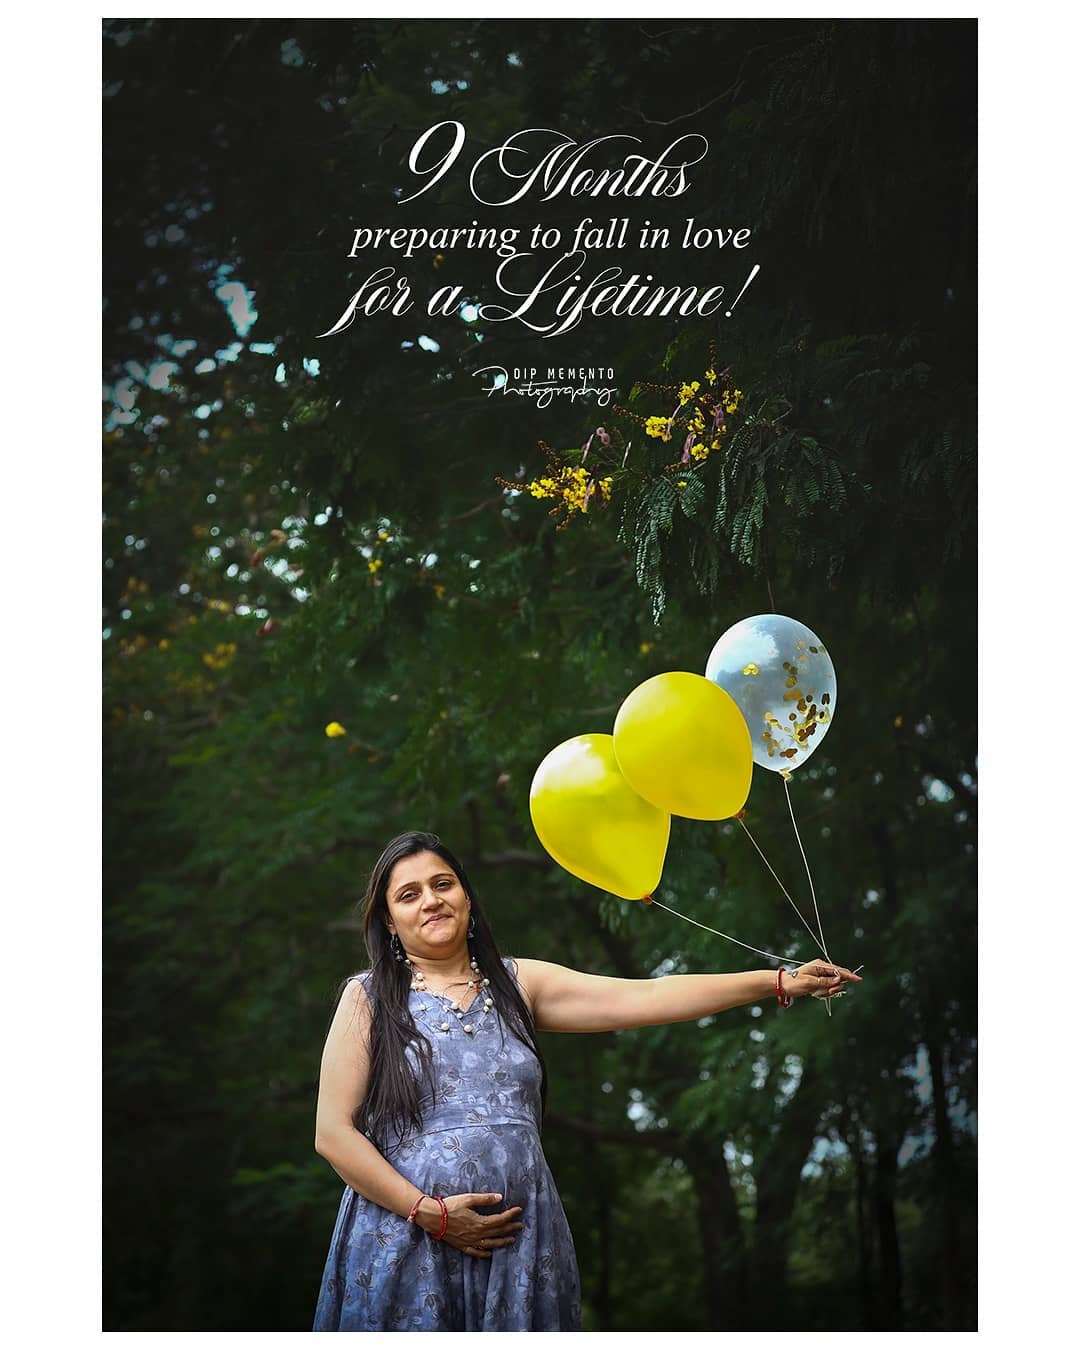 💞9 Months preparing to fall in love for a Lifetime💕👶 .
.
 Shoot by : @dip_memento_photography
@meandmyphotography11
.
.
Maternity Shoot.
.
.
Shoot With Canon 5d Mark iv + #Godox Hss
@canonindia_official
.
#maternityphotographer #maternityphotography #maternity #mommytobe #momtobe #newmommy #pregnant #pregnancy #expectingmother #9924227745 #maternityportraits #maternitypictures #motherhood #maternityshoot #babybump #daddytobe #dadtobe #babyiscomingsoon #thebump #maternityshoot #maternityphotographyahmedabad #dipmementophotography #ahmedabadphotographer #mothertobe #expectingbaby #BABYBUMP #maternityposes #maternityposing